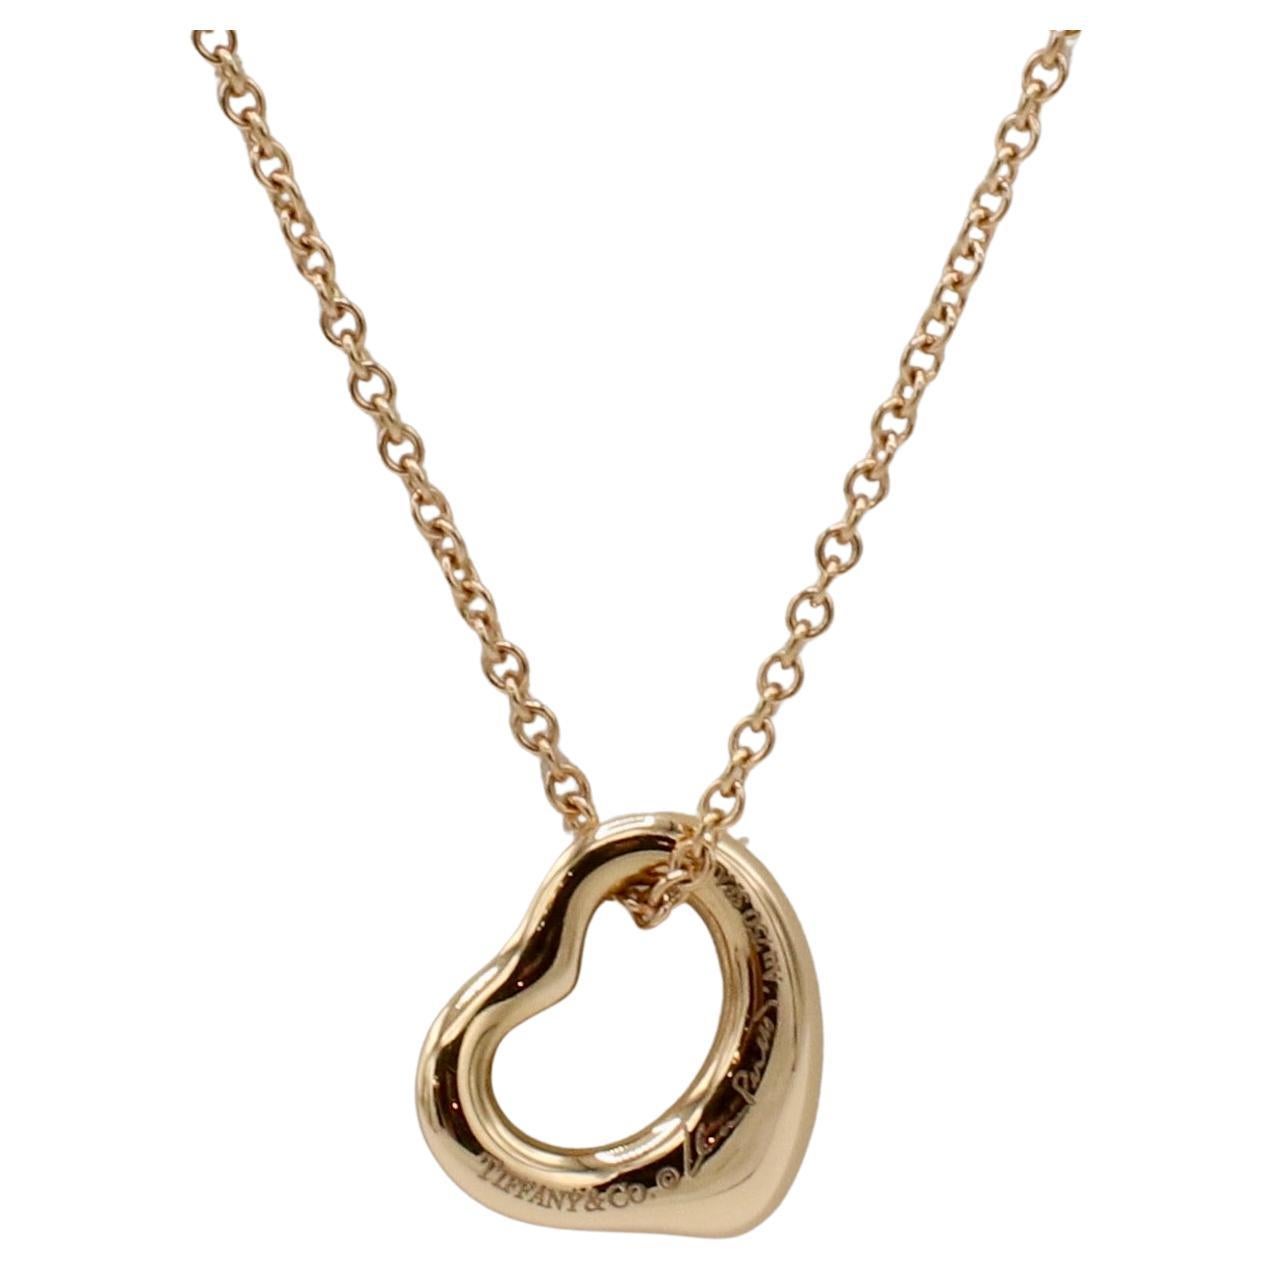 Tiffany & Co. Elsa Peretti Rose Gold Open Heart Pendant Necklace 
Metal: 18k rose gold
Weight: 3.1 grams
Heart: 11mm
Chain length: 16 inches
Signed: Tiffany & Co. © Elsa Peretti Au 750 SPAIN
Retail: $1,025 USD